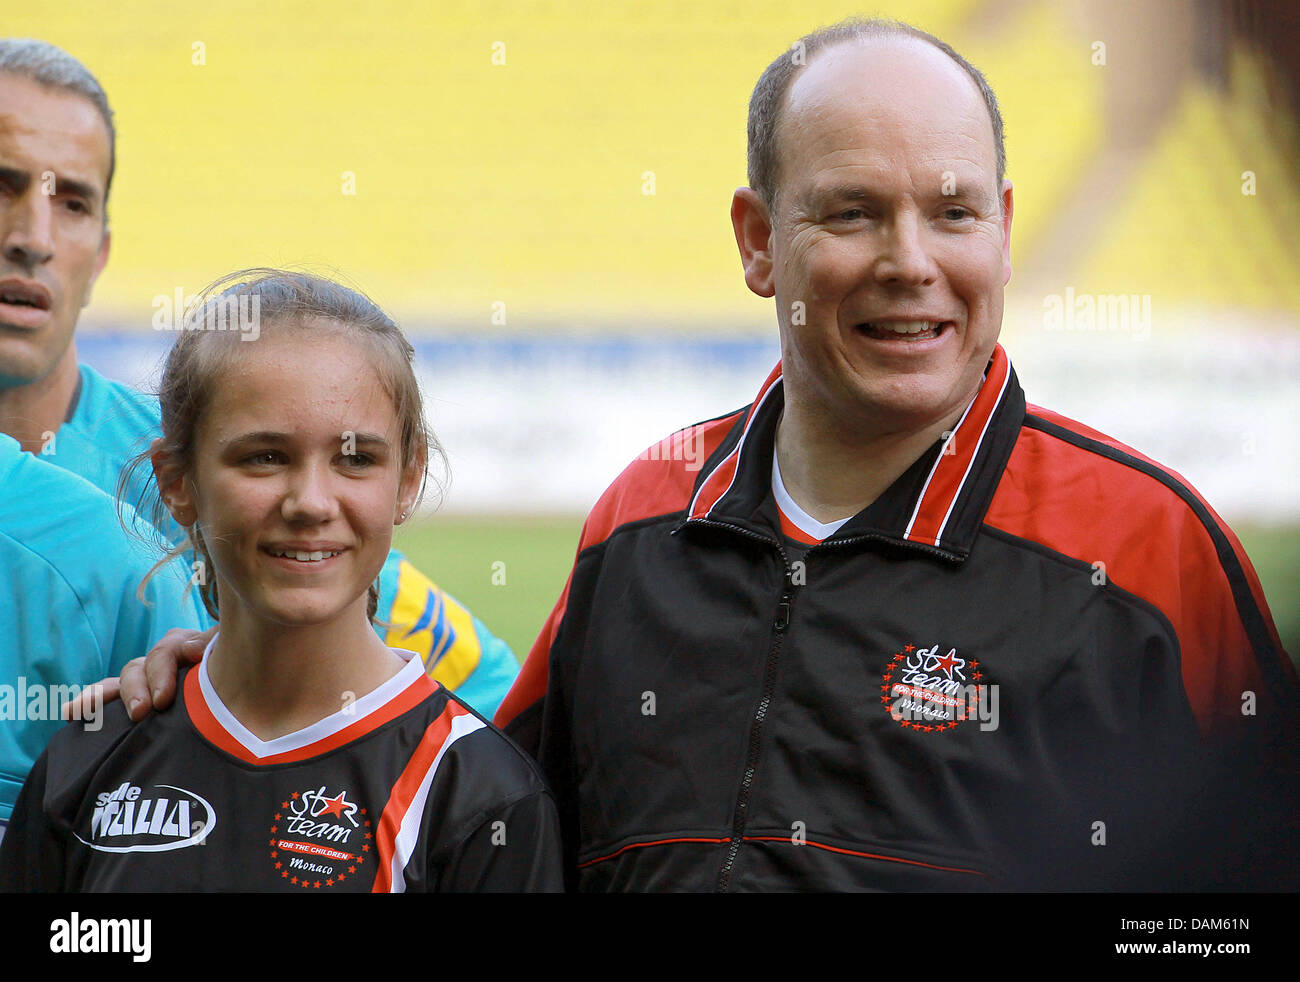 Prince Albert II of Monaco (R) during a charity football match between racing drivers and celebrities prior to the Formula One Grand Prix of Monaco in Monte Carlo, Monaco, 24 May 2011. The Grand Prix will take place on 29 May. Photo: Jens Buettner dpa Stock Photo